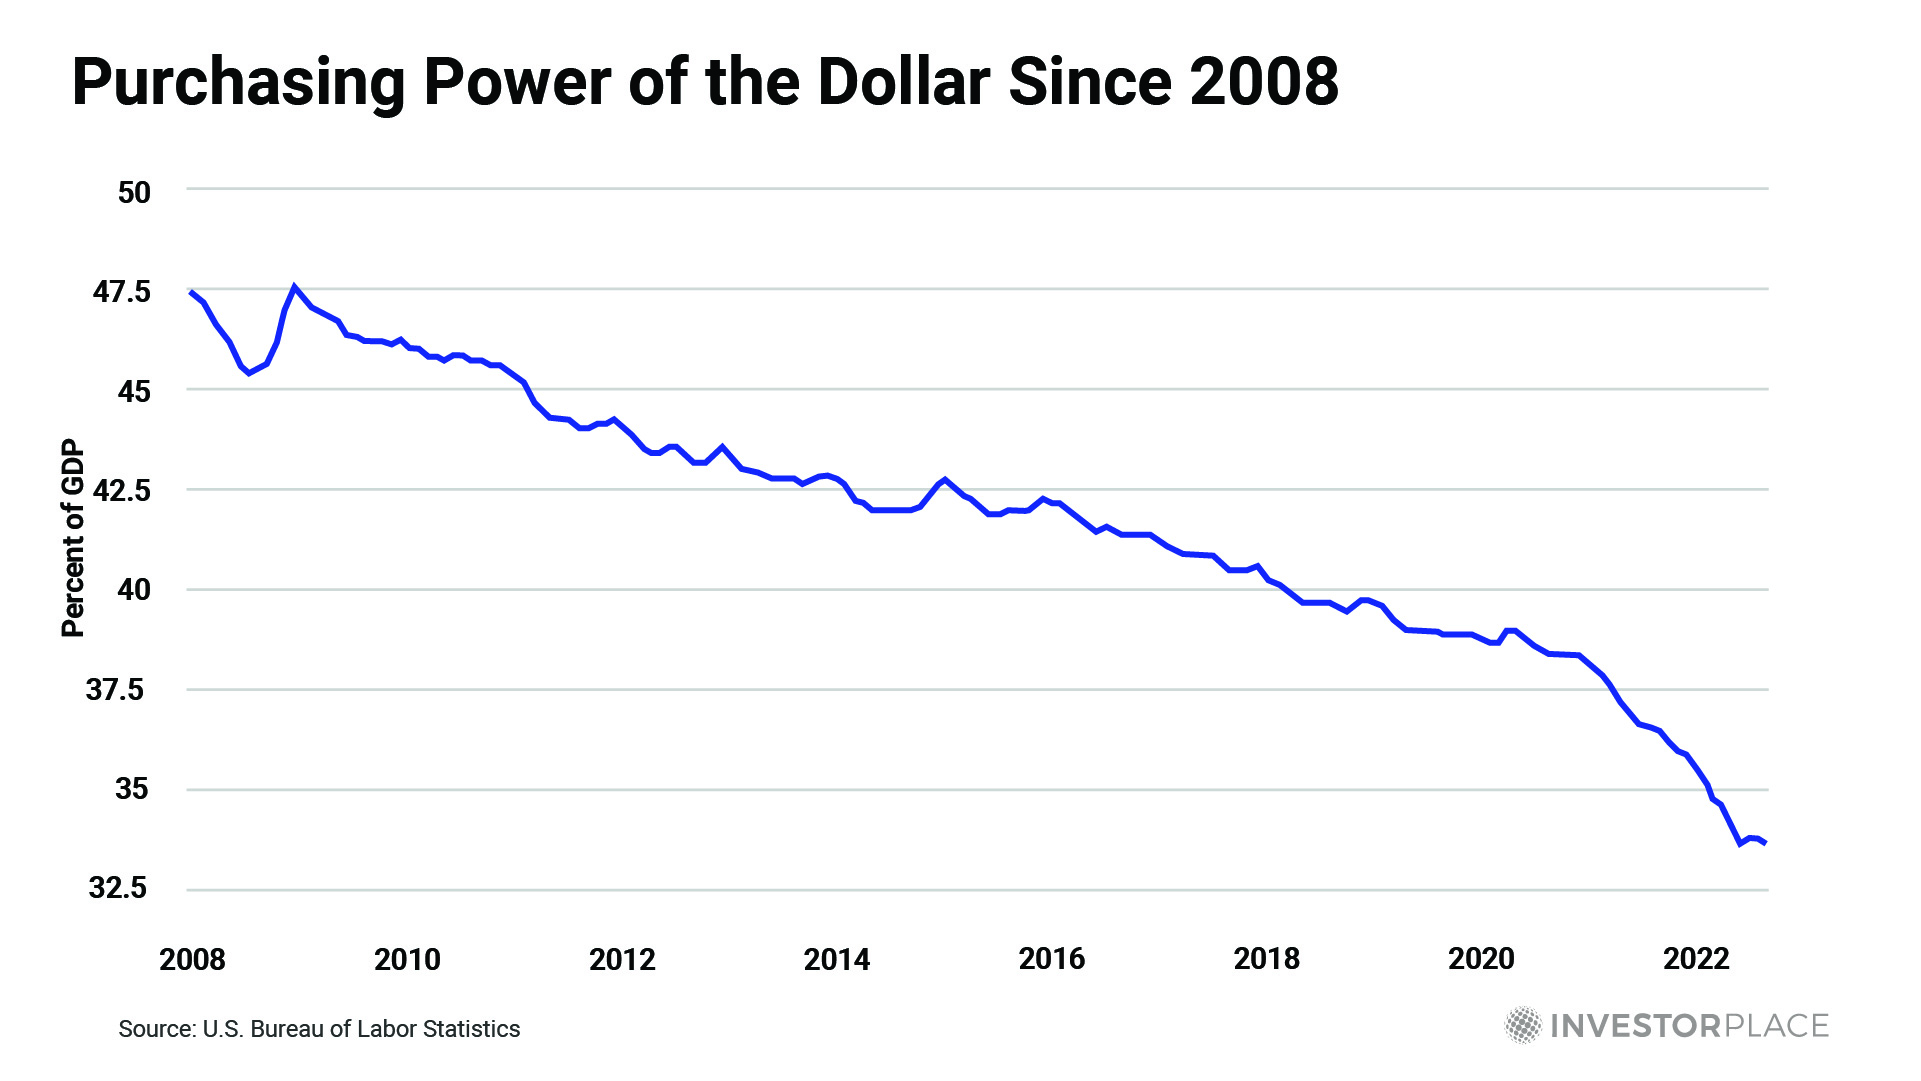 Chart of the purchasing power of the dollar since 2008